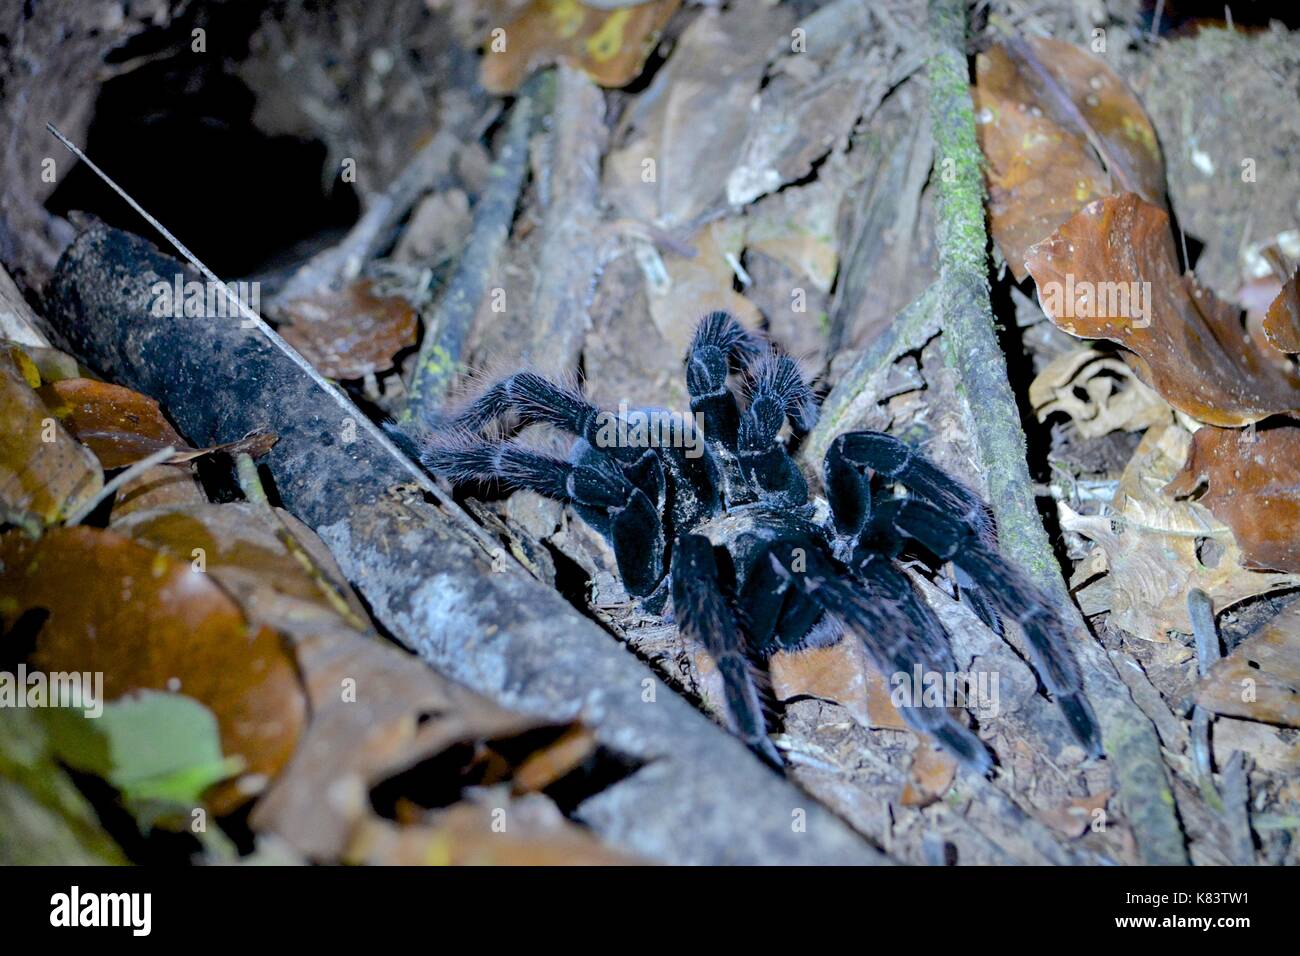 A Tarantula spider comes out of its nesting hole in the Amazon rainforest Stock Photo